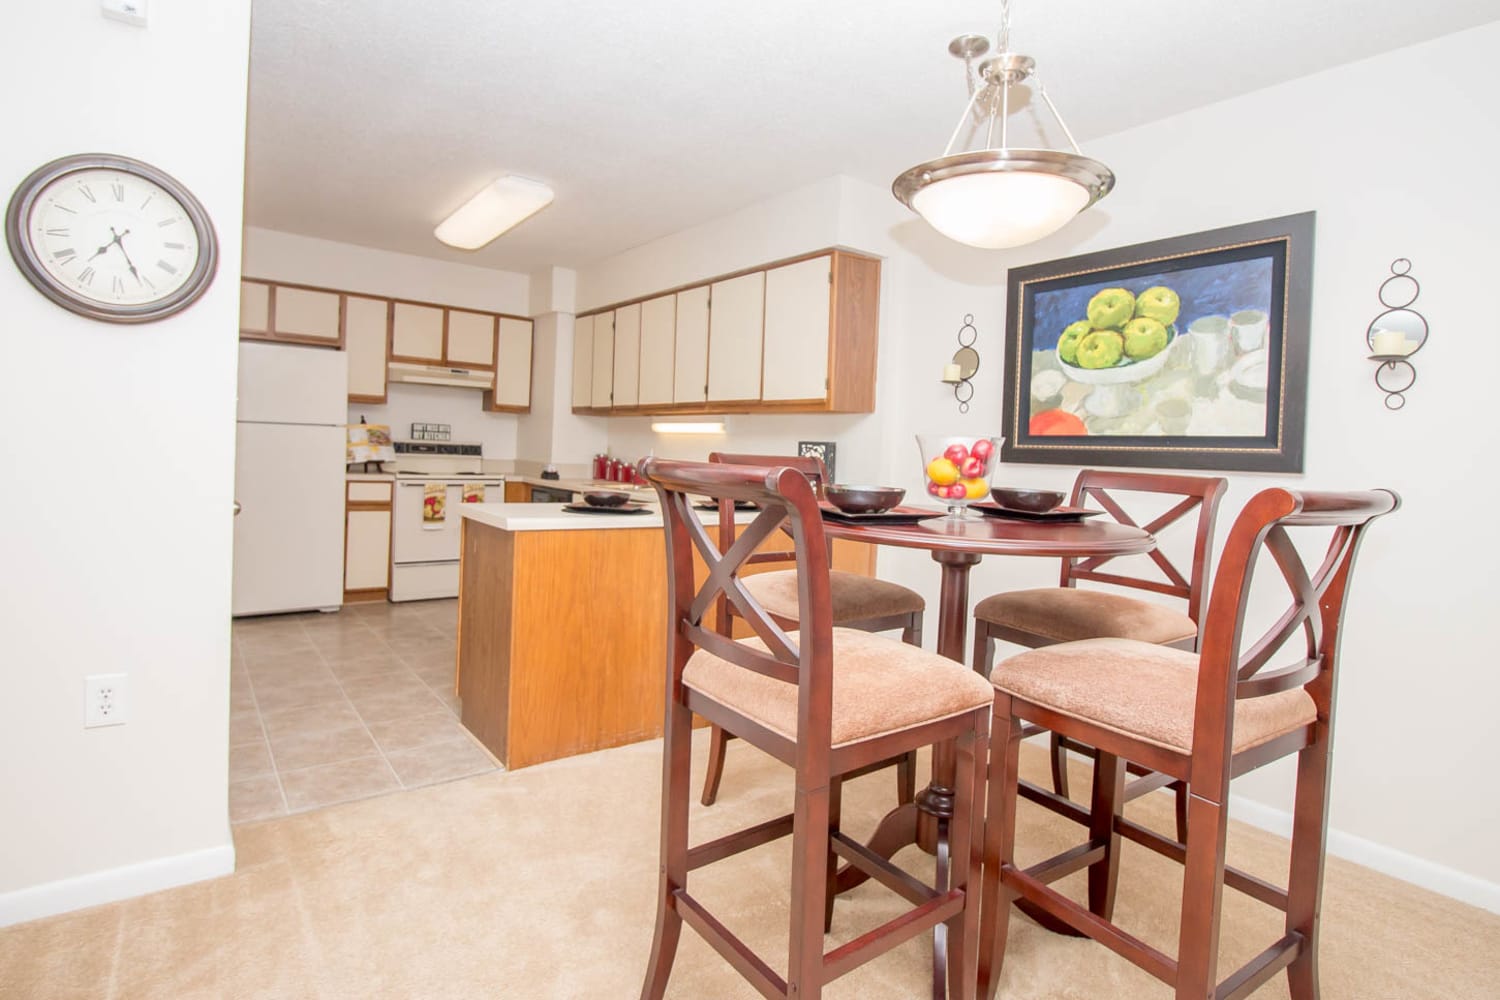 Dining area and kitchen of a model home at River Park Tower Apartment Homes in Newport News, Virginia